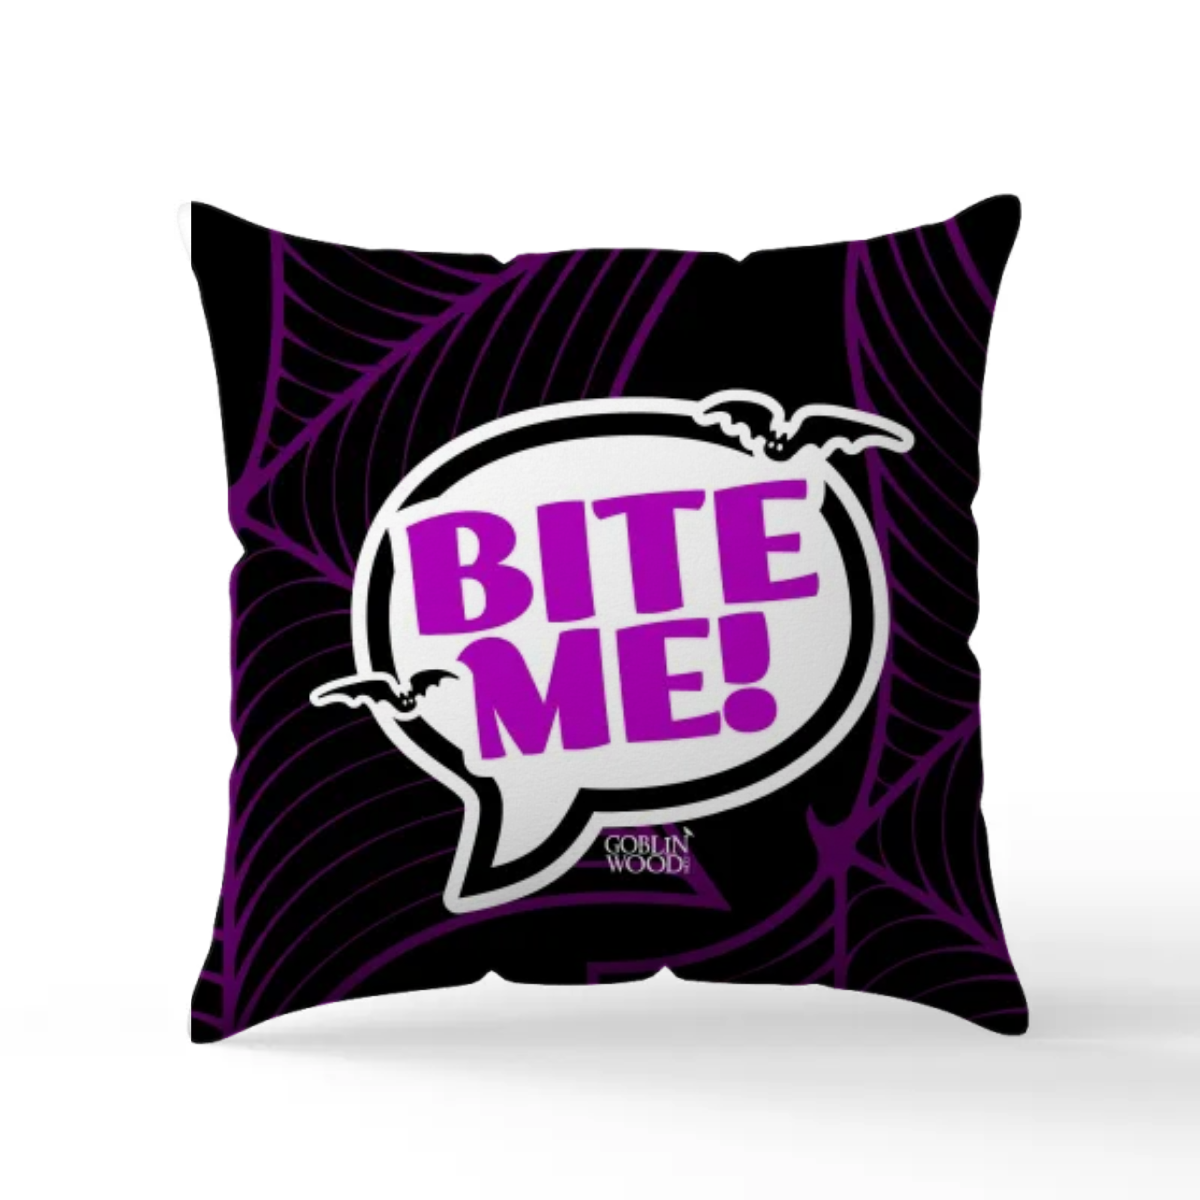 Bite Me! Scatter Cushion - Buffy Inspired Goblin Wood Exclusive